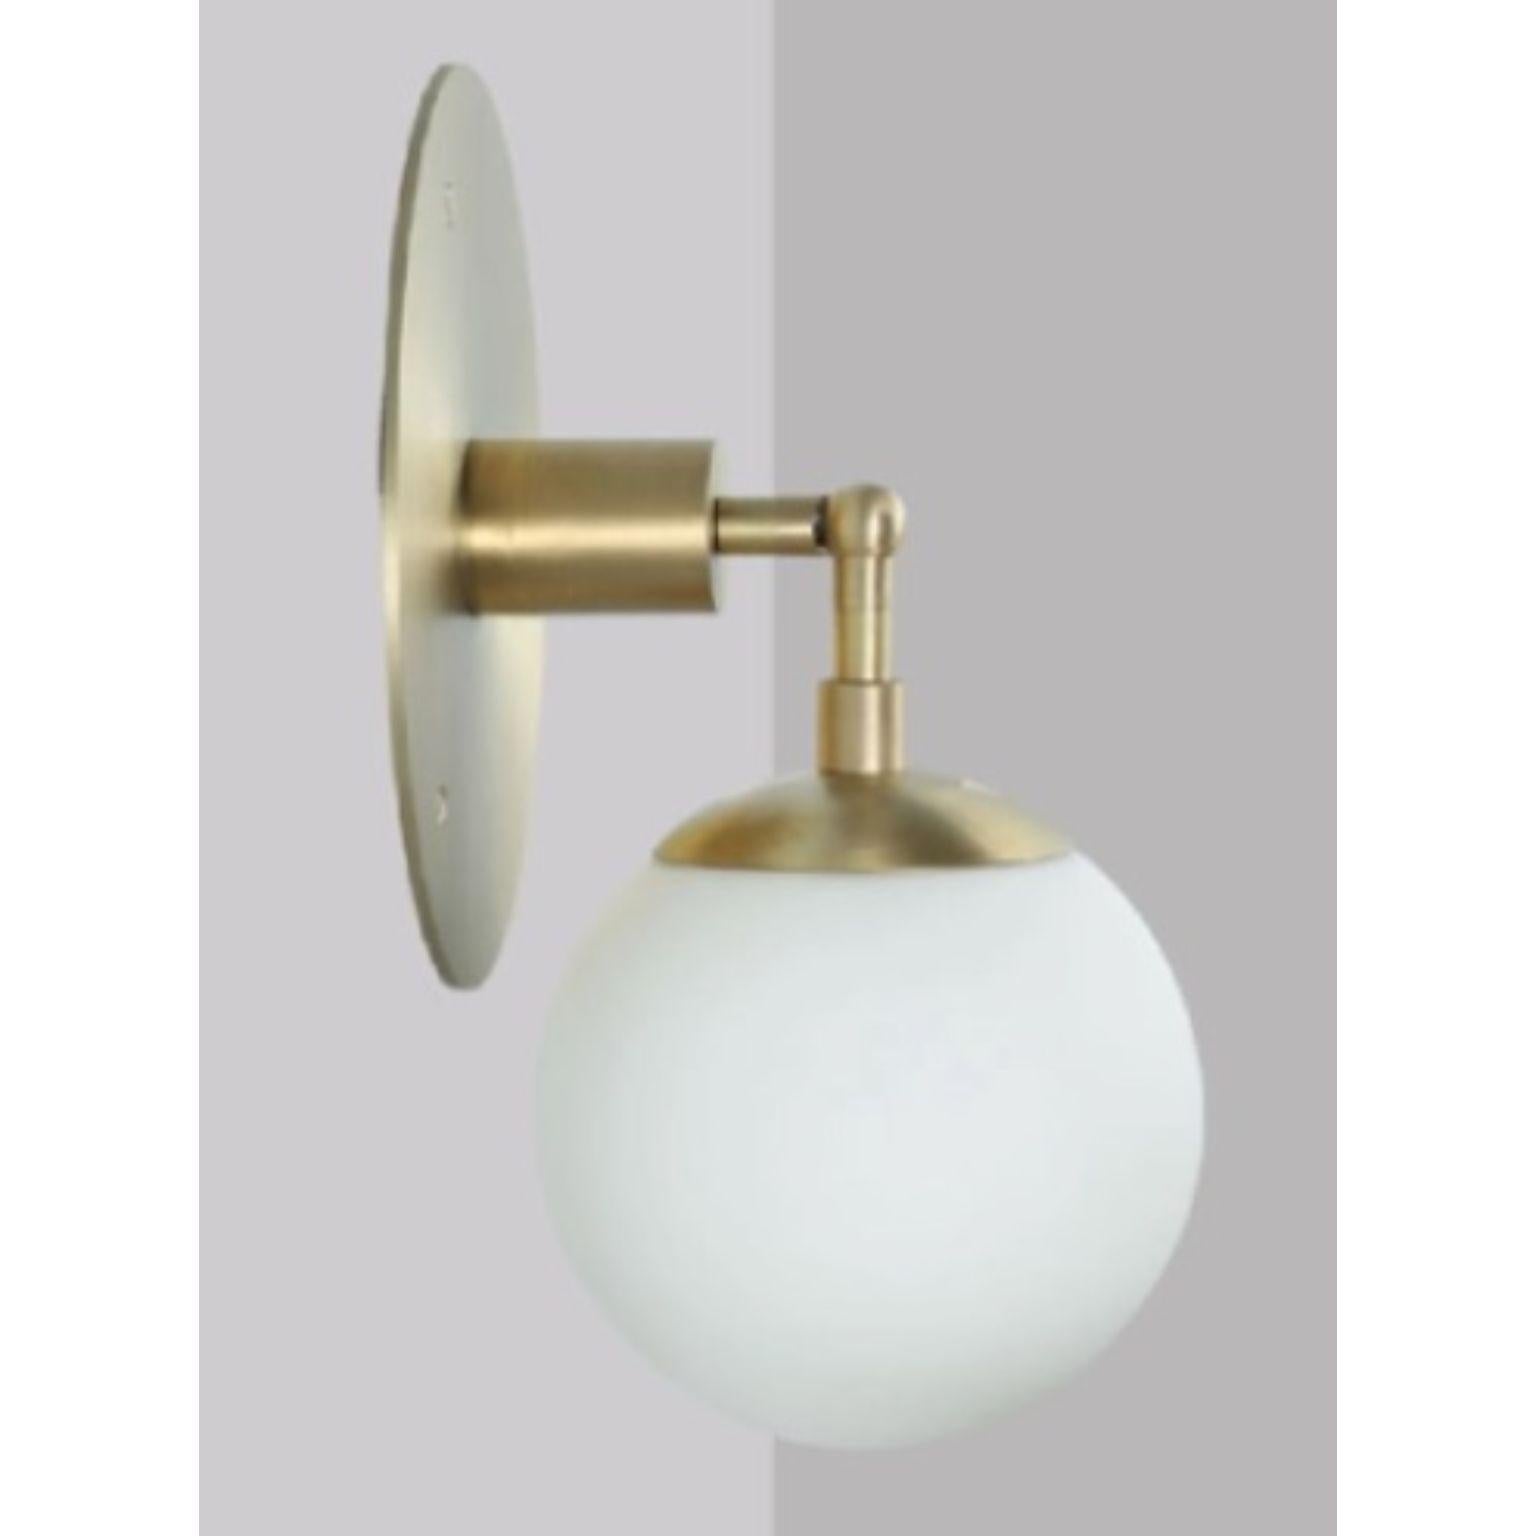 Fly Glass Globe Wall Sconce by Lamp Shaper
Dimensions: D 20.5 x W 30.5 x H 33 cm.
Materials: Brass and glass.

Different finishes available: raw brass, aged brass, burnt brass and brushed brass Please contact us.

All our lamps can be wired